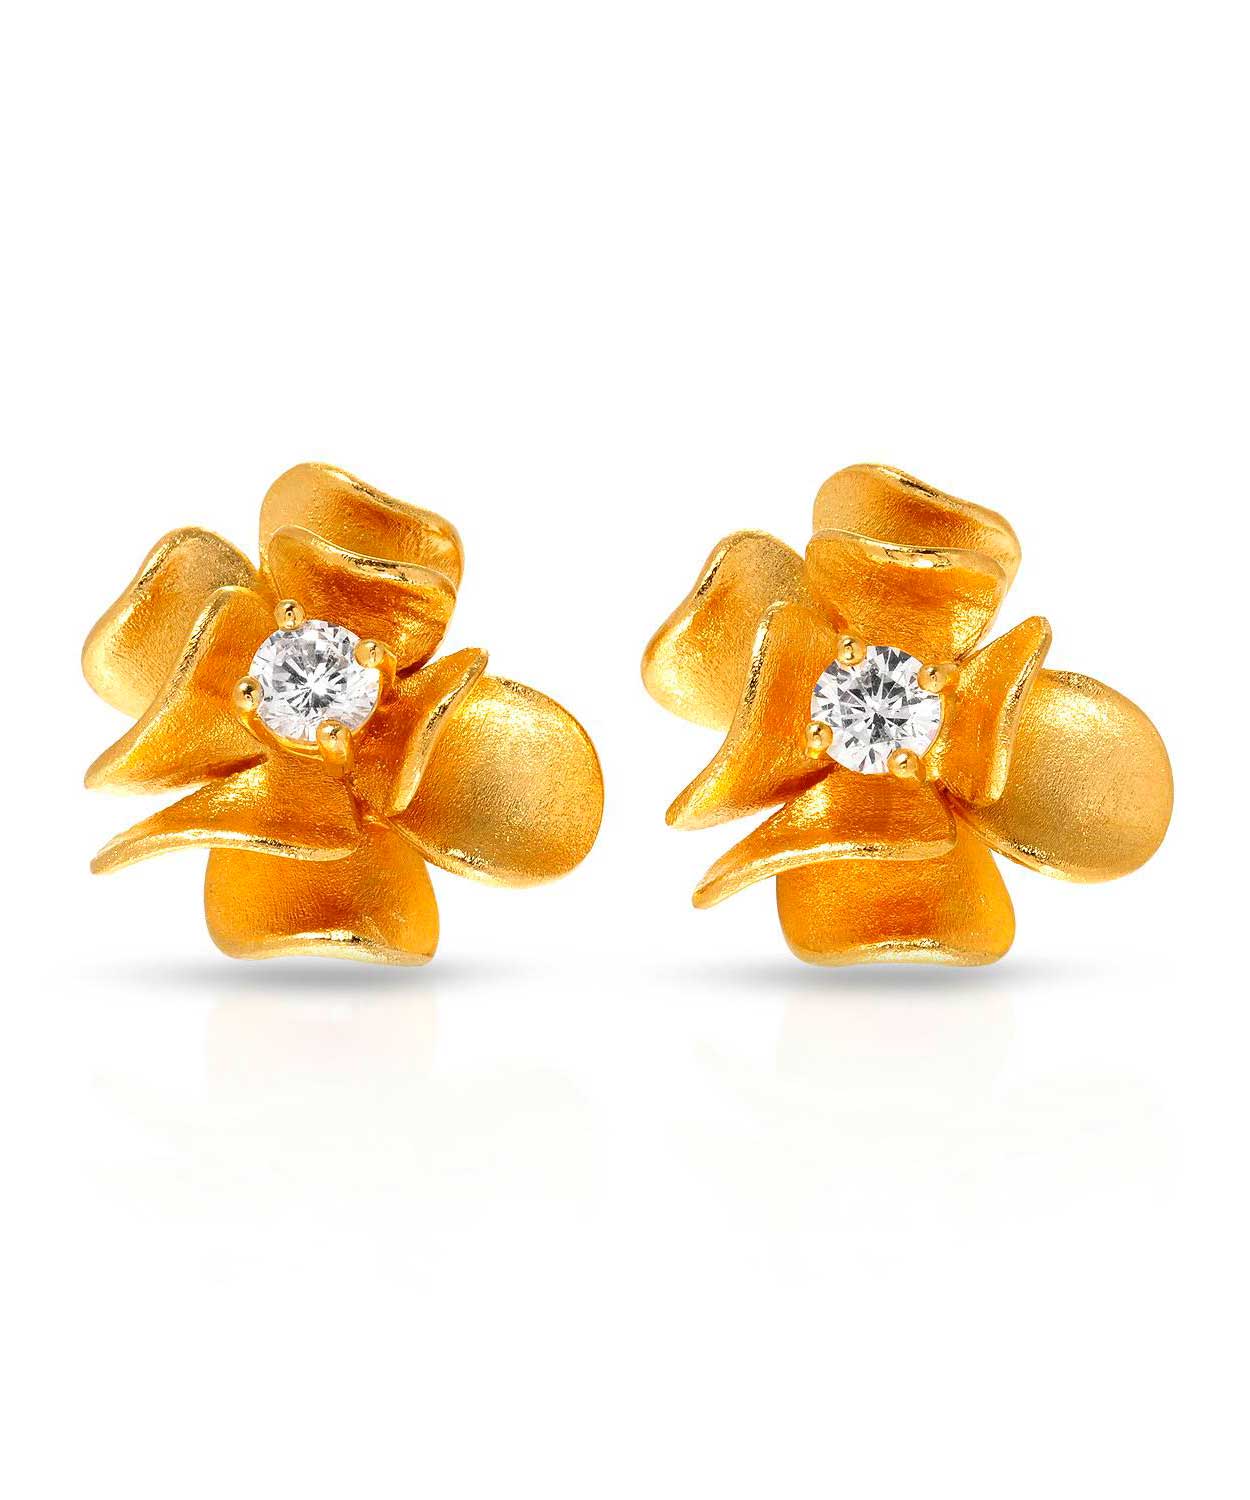 Brilliant Cut Cubic Zirconia 14k Gold Plated 925 Sterling Silver Flower Earrings View 1